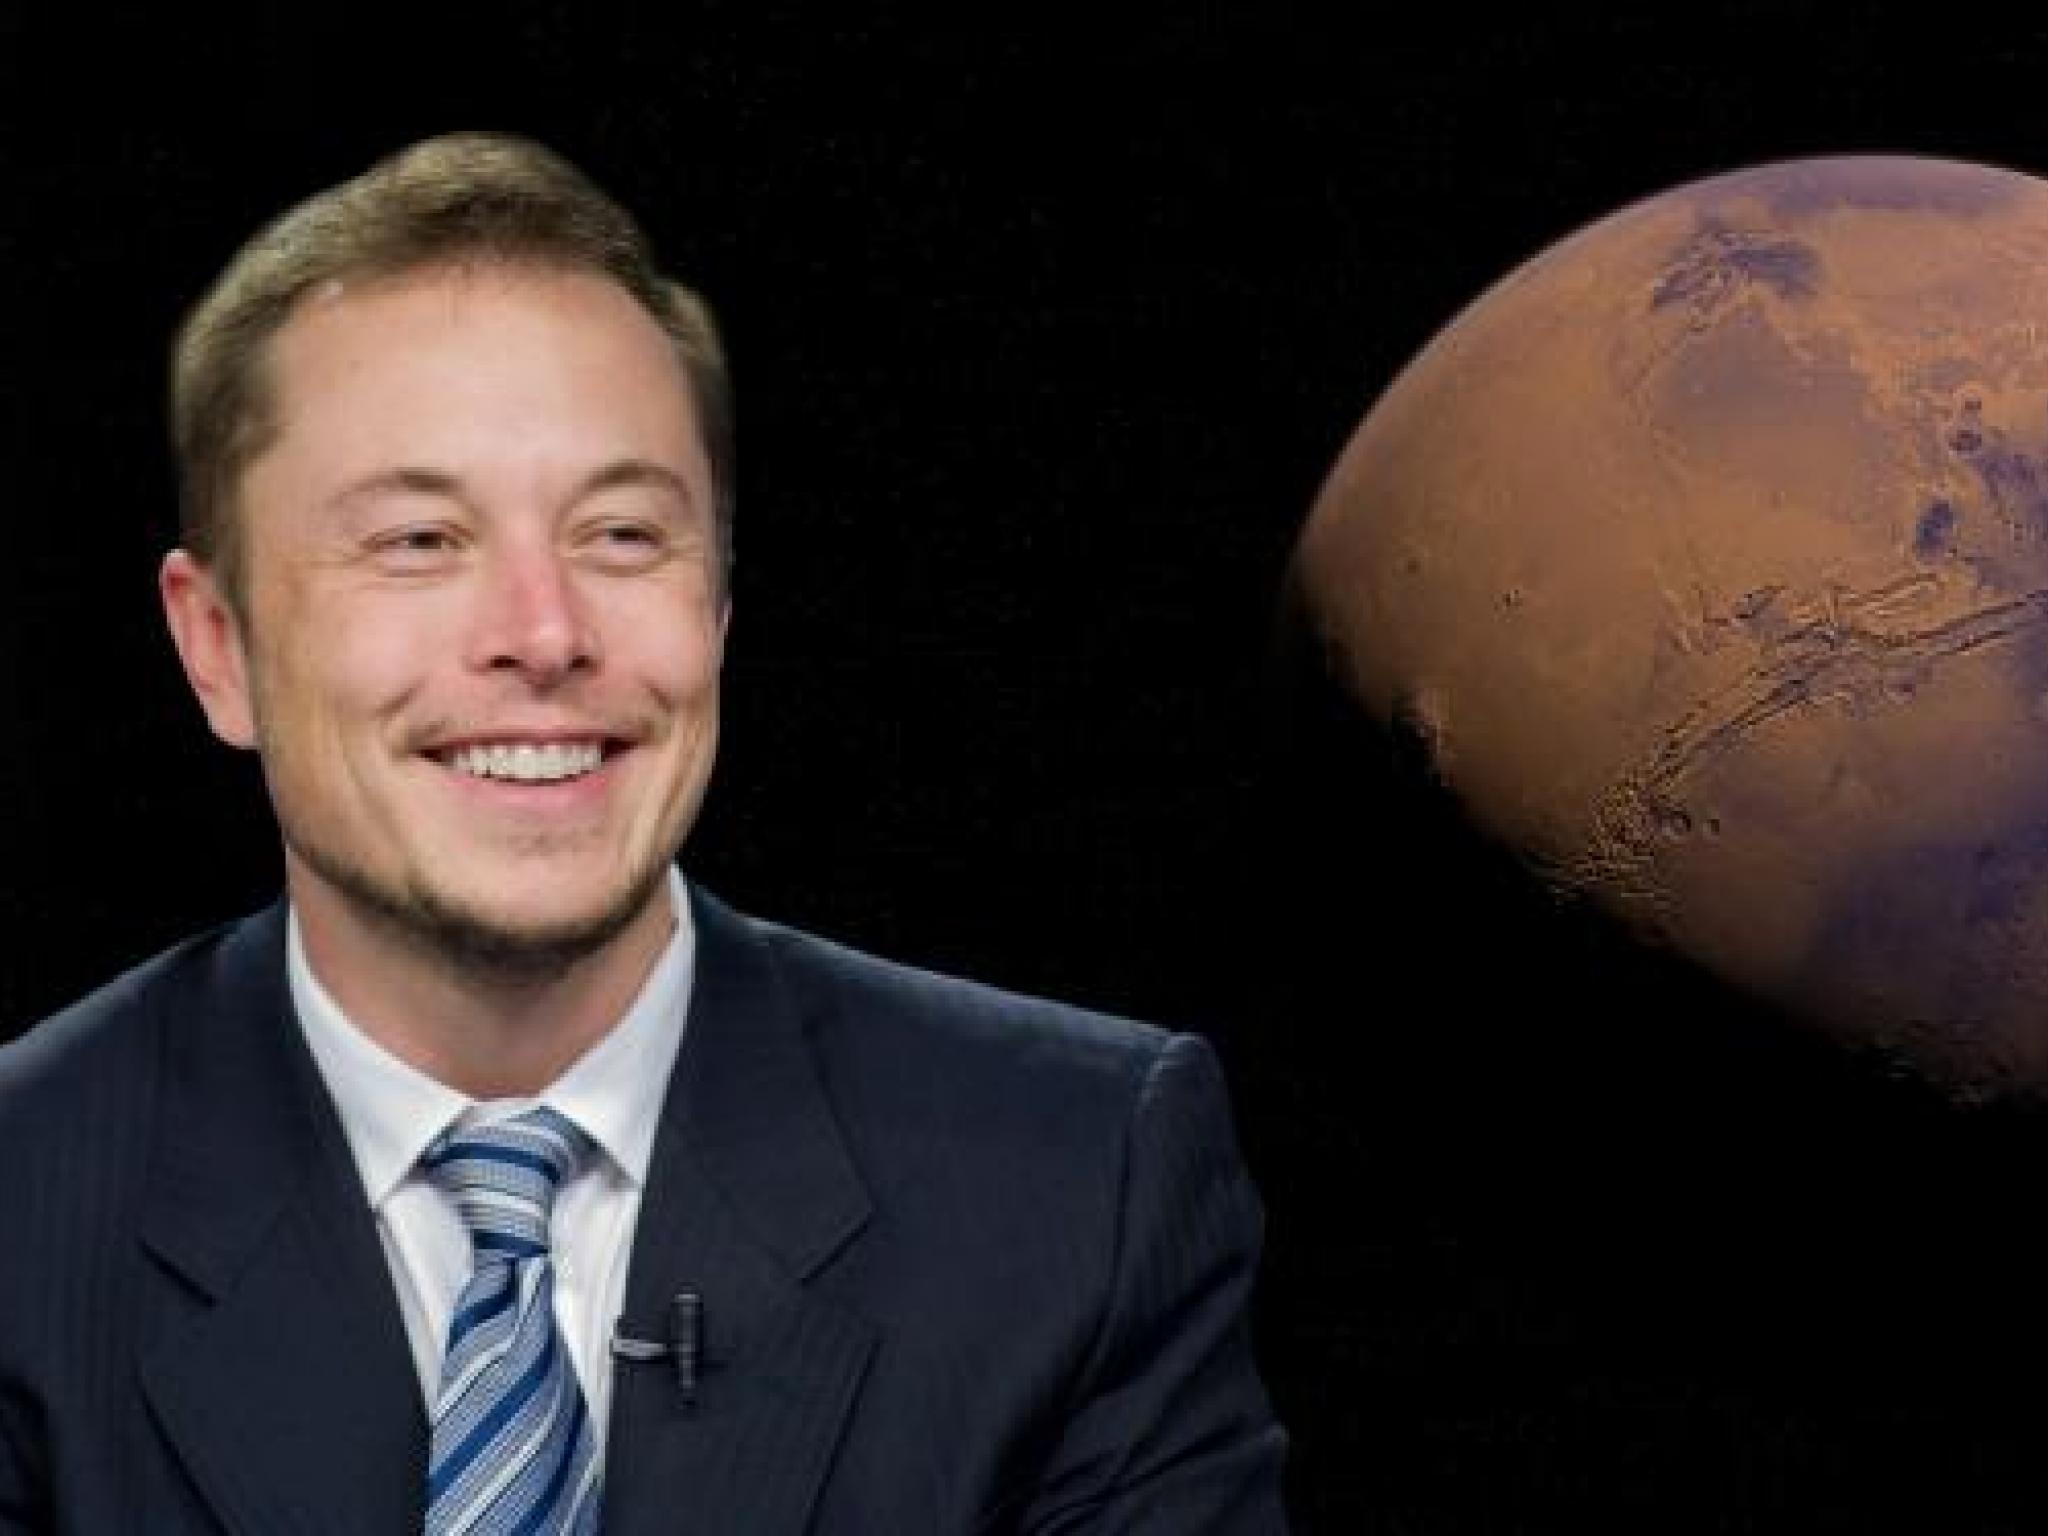  elon-musk-becomes-373m-richer-after-teslas-stock-rise-far-and-away-the-worlds-wealthiest-person 